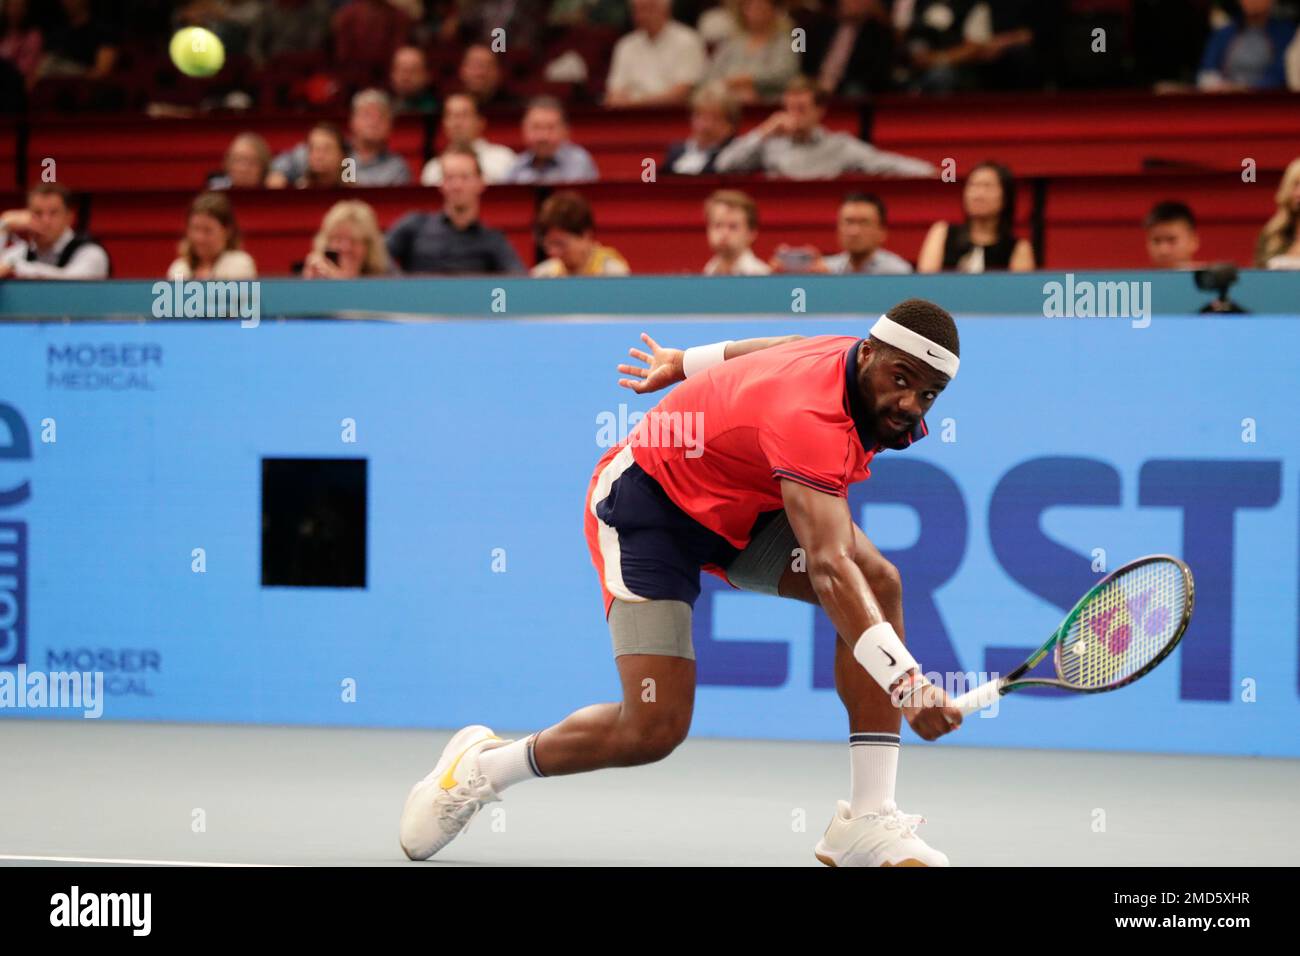 Frances Tiafoe of the United States returns the ball to Jannik Sinner of Italy during their semi final match at the Erste Bank Open ATP tennis tournament in Vienna, Austria, Saturday, Oct.